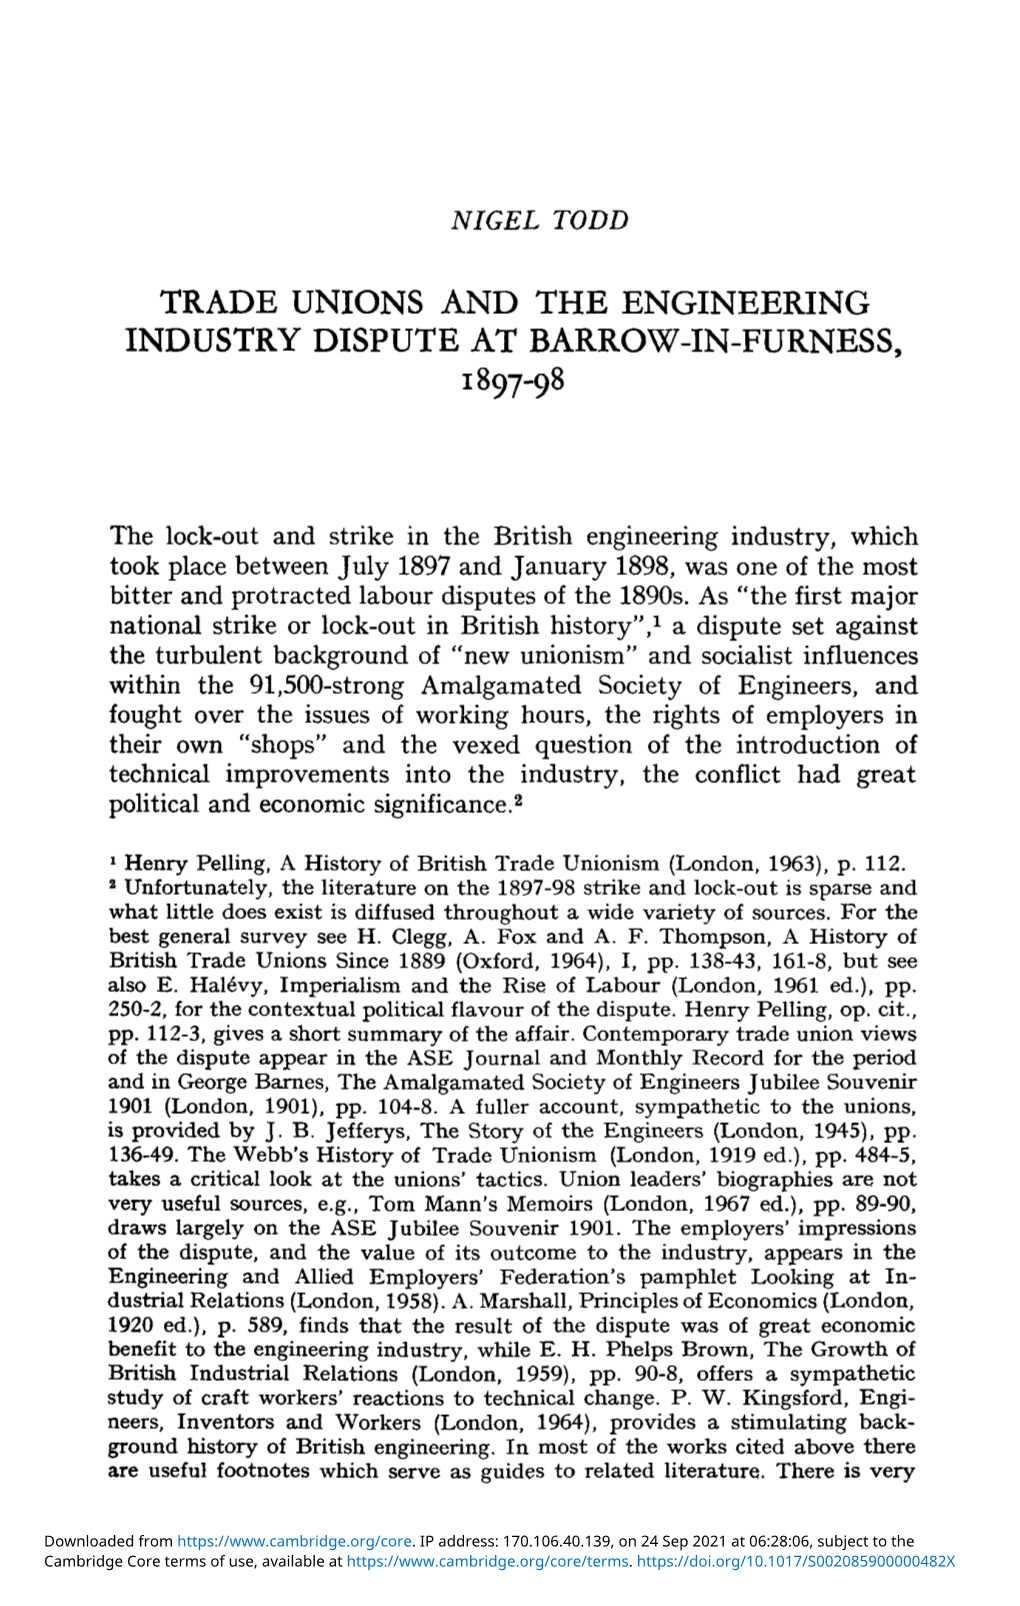 Trade Unions and the Engineering Industry Dispute at Barrow-In-Furness, 1897–98